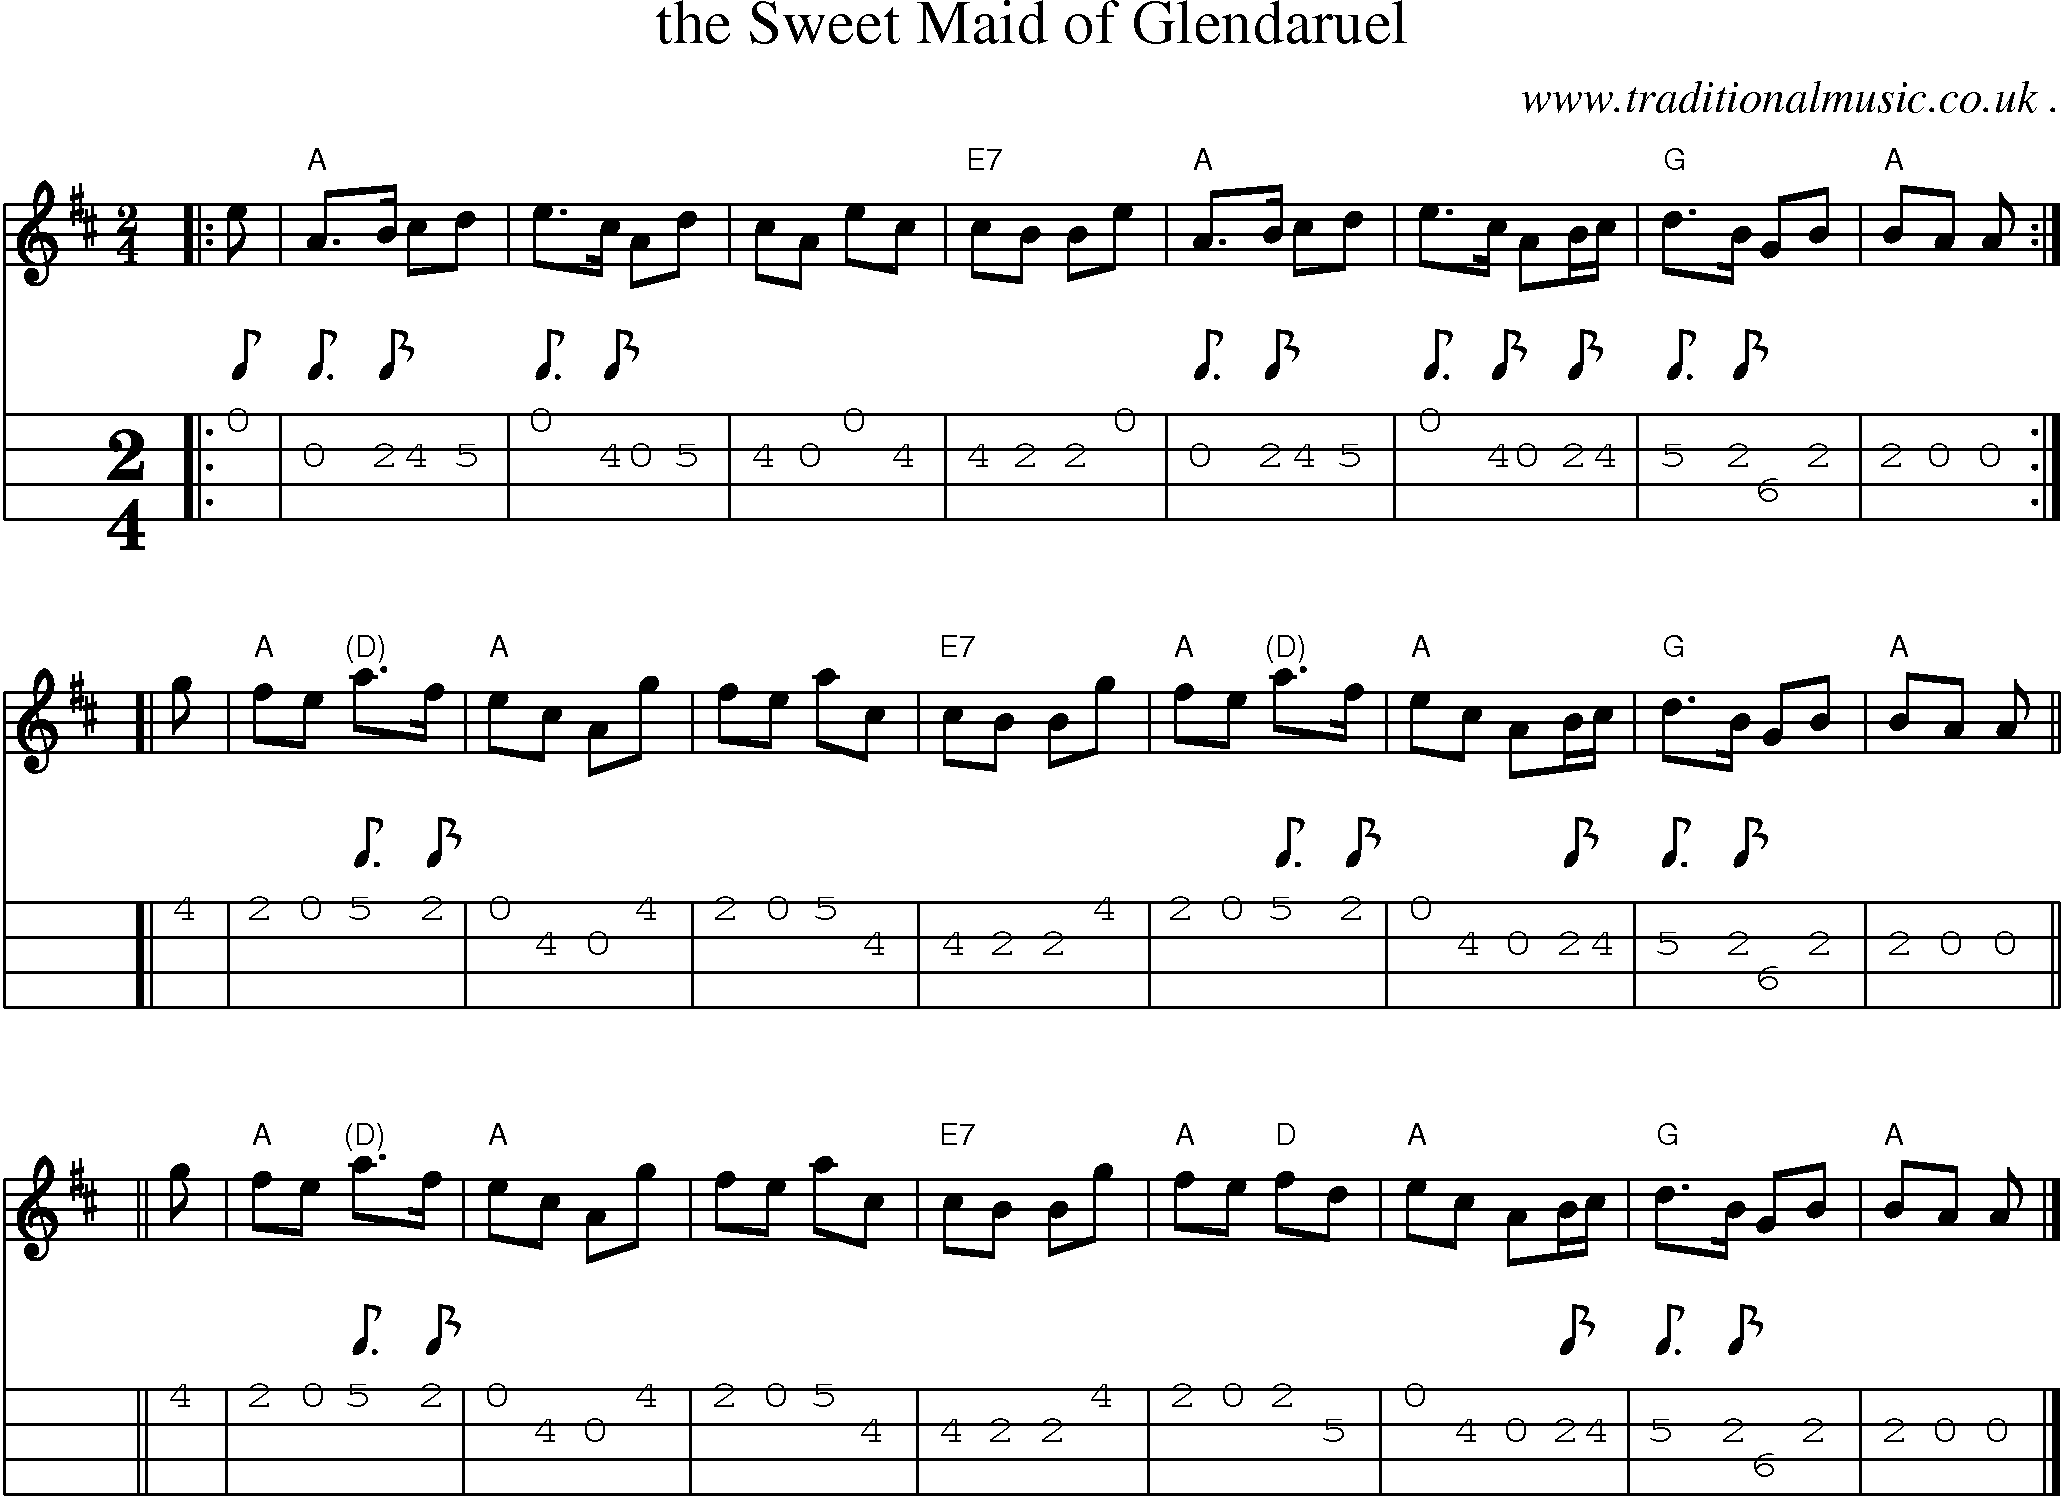 Sheet-music  score, Chords and Mandolin Tabs for The Sweet Maid Of Glendaruel